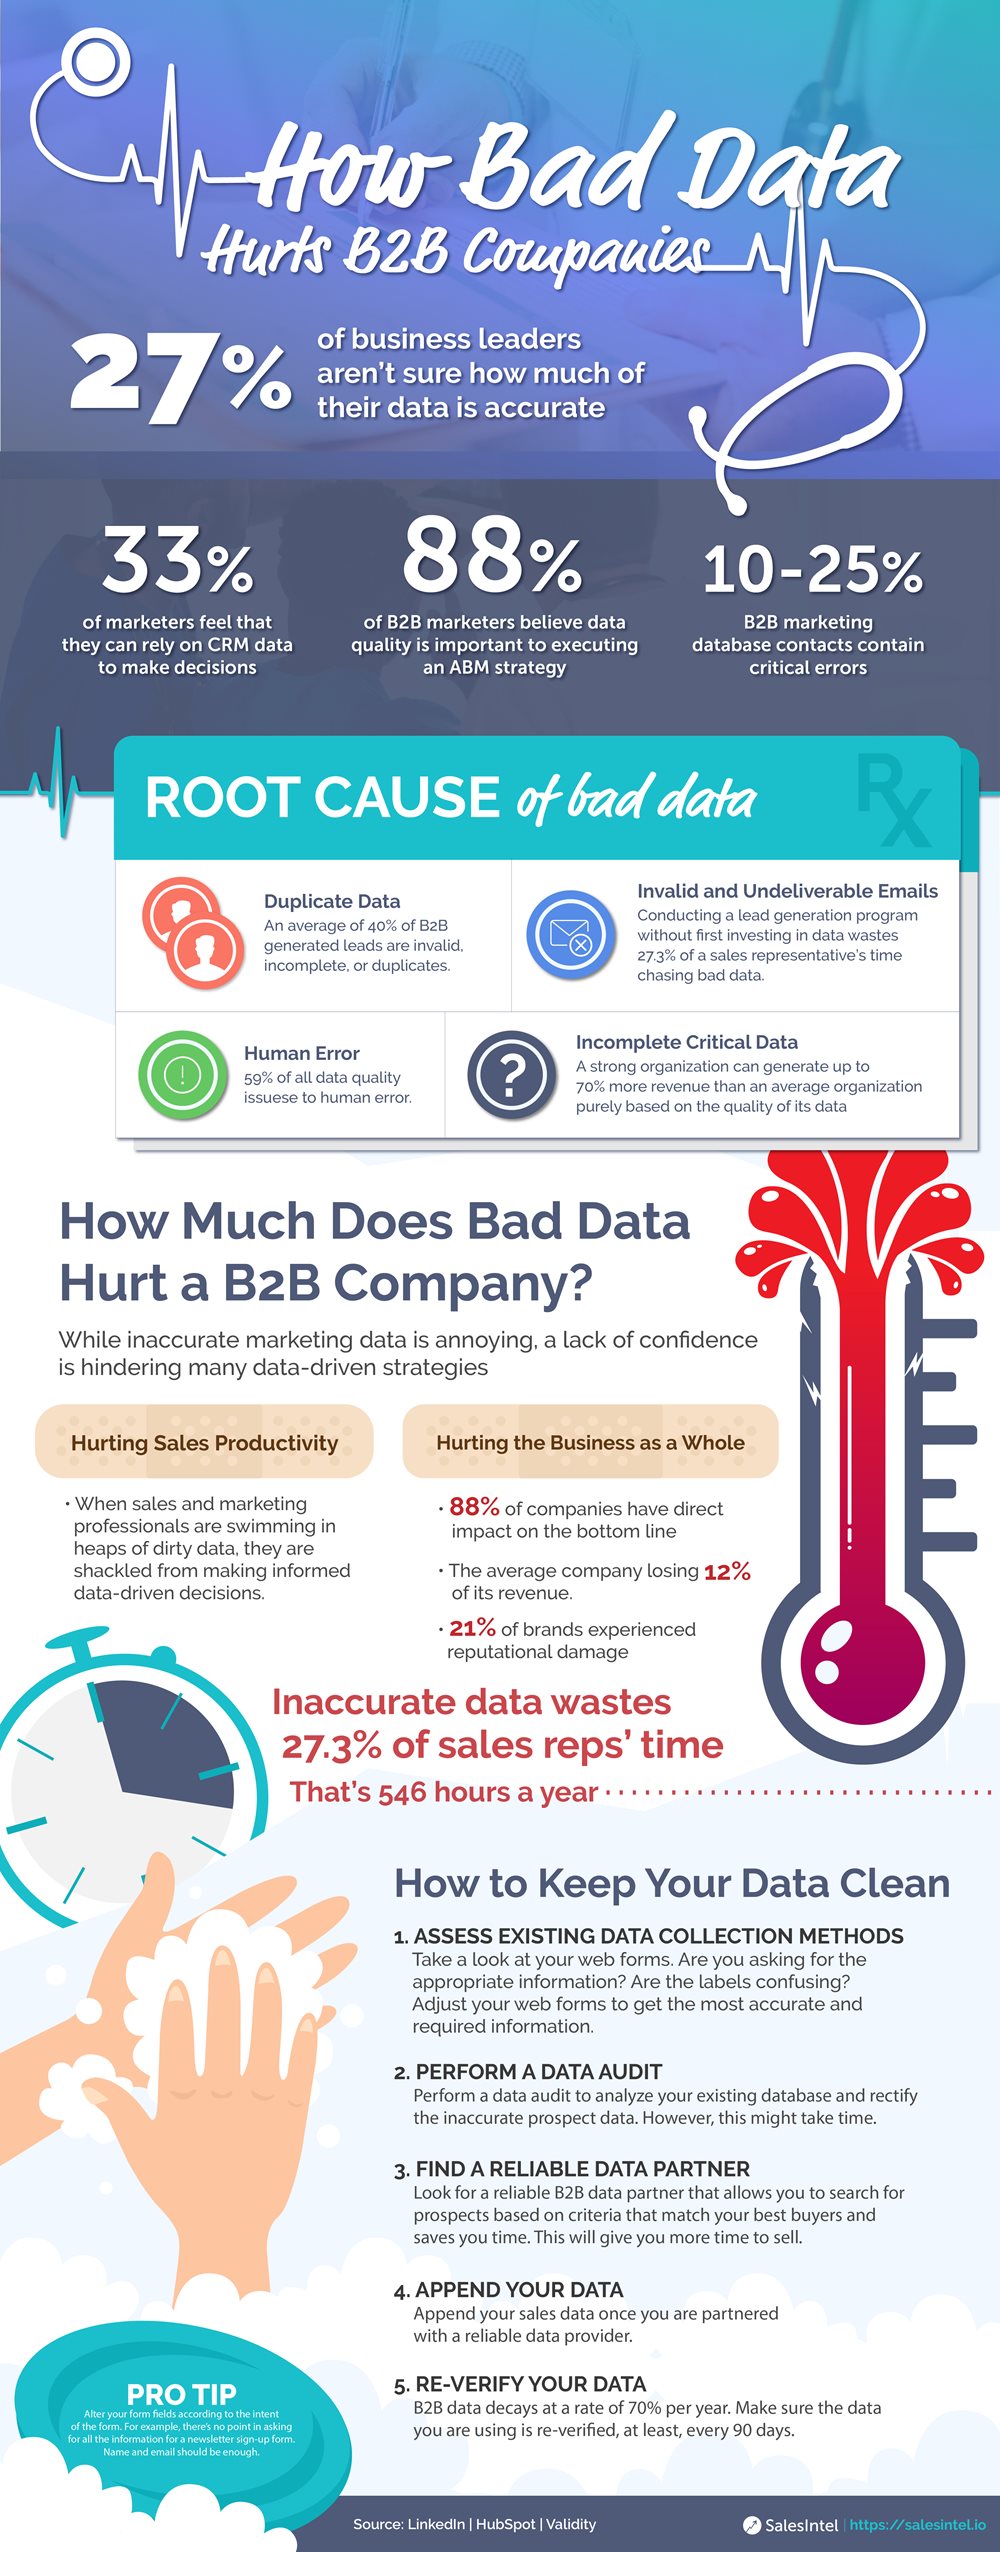 SalesIntel highlights the root cause of bad data, how it can hurt a B2B company and how to keep your data clean